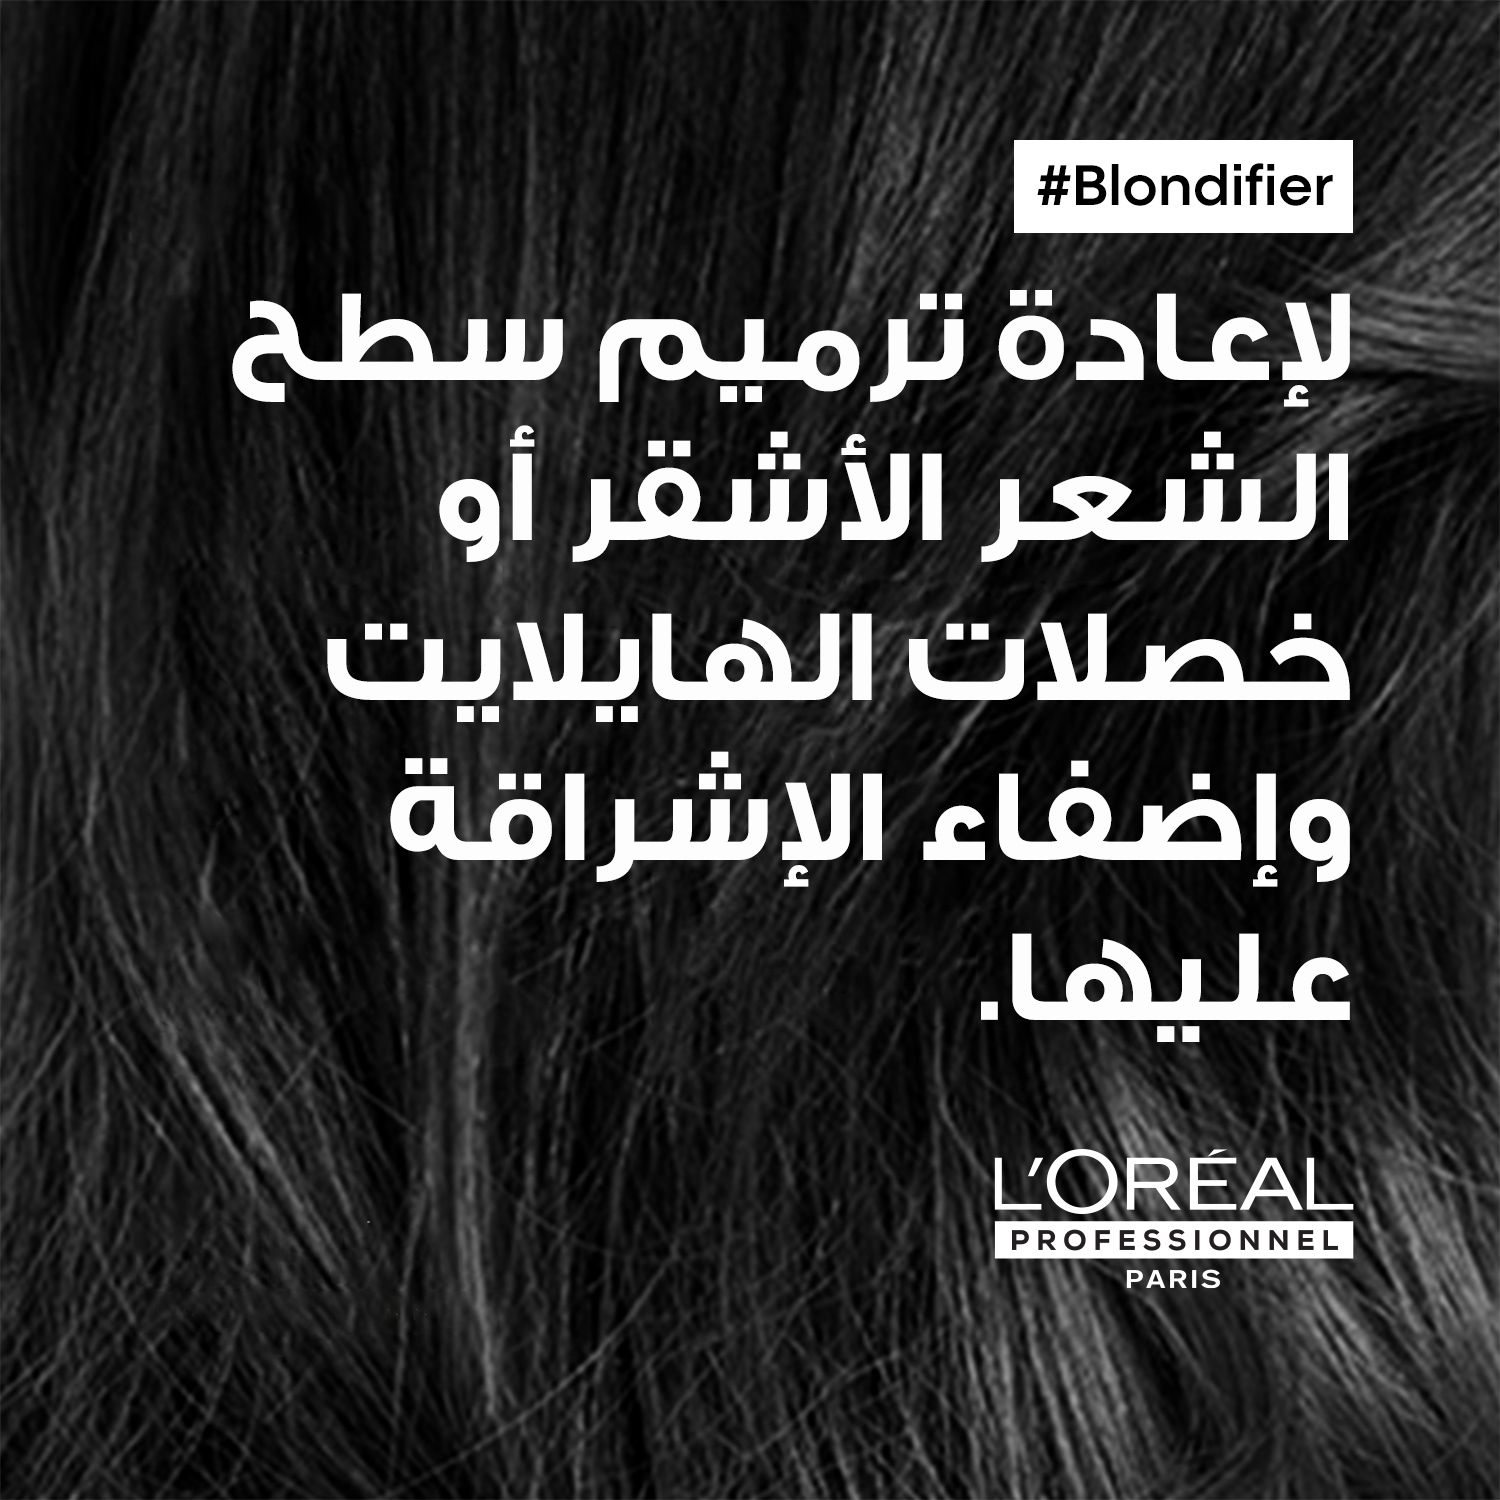 L’Oréal Professionnel Blondifier Conditioner for highlighted or blond hair SERIE EXPERT 200mL